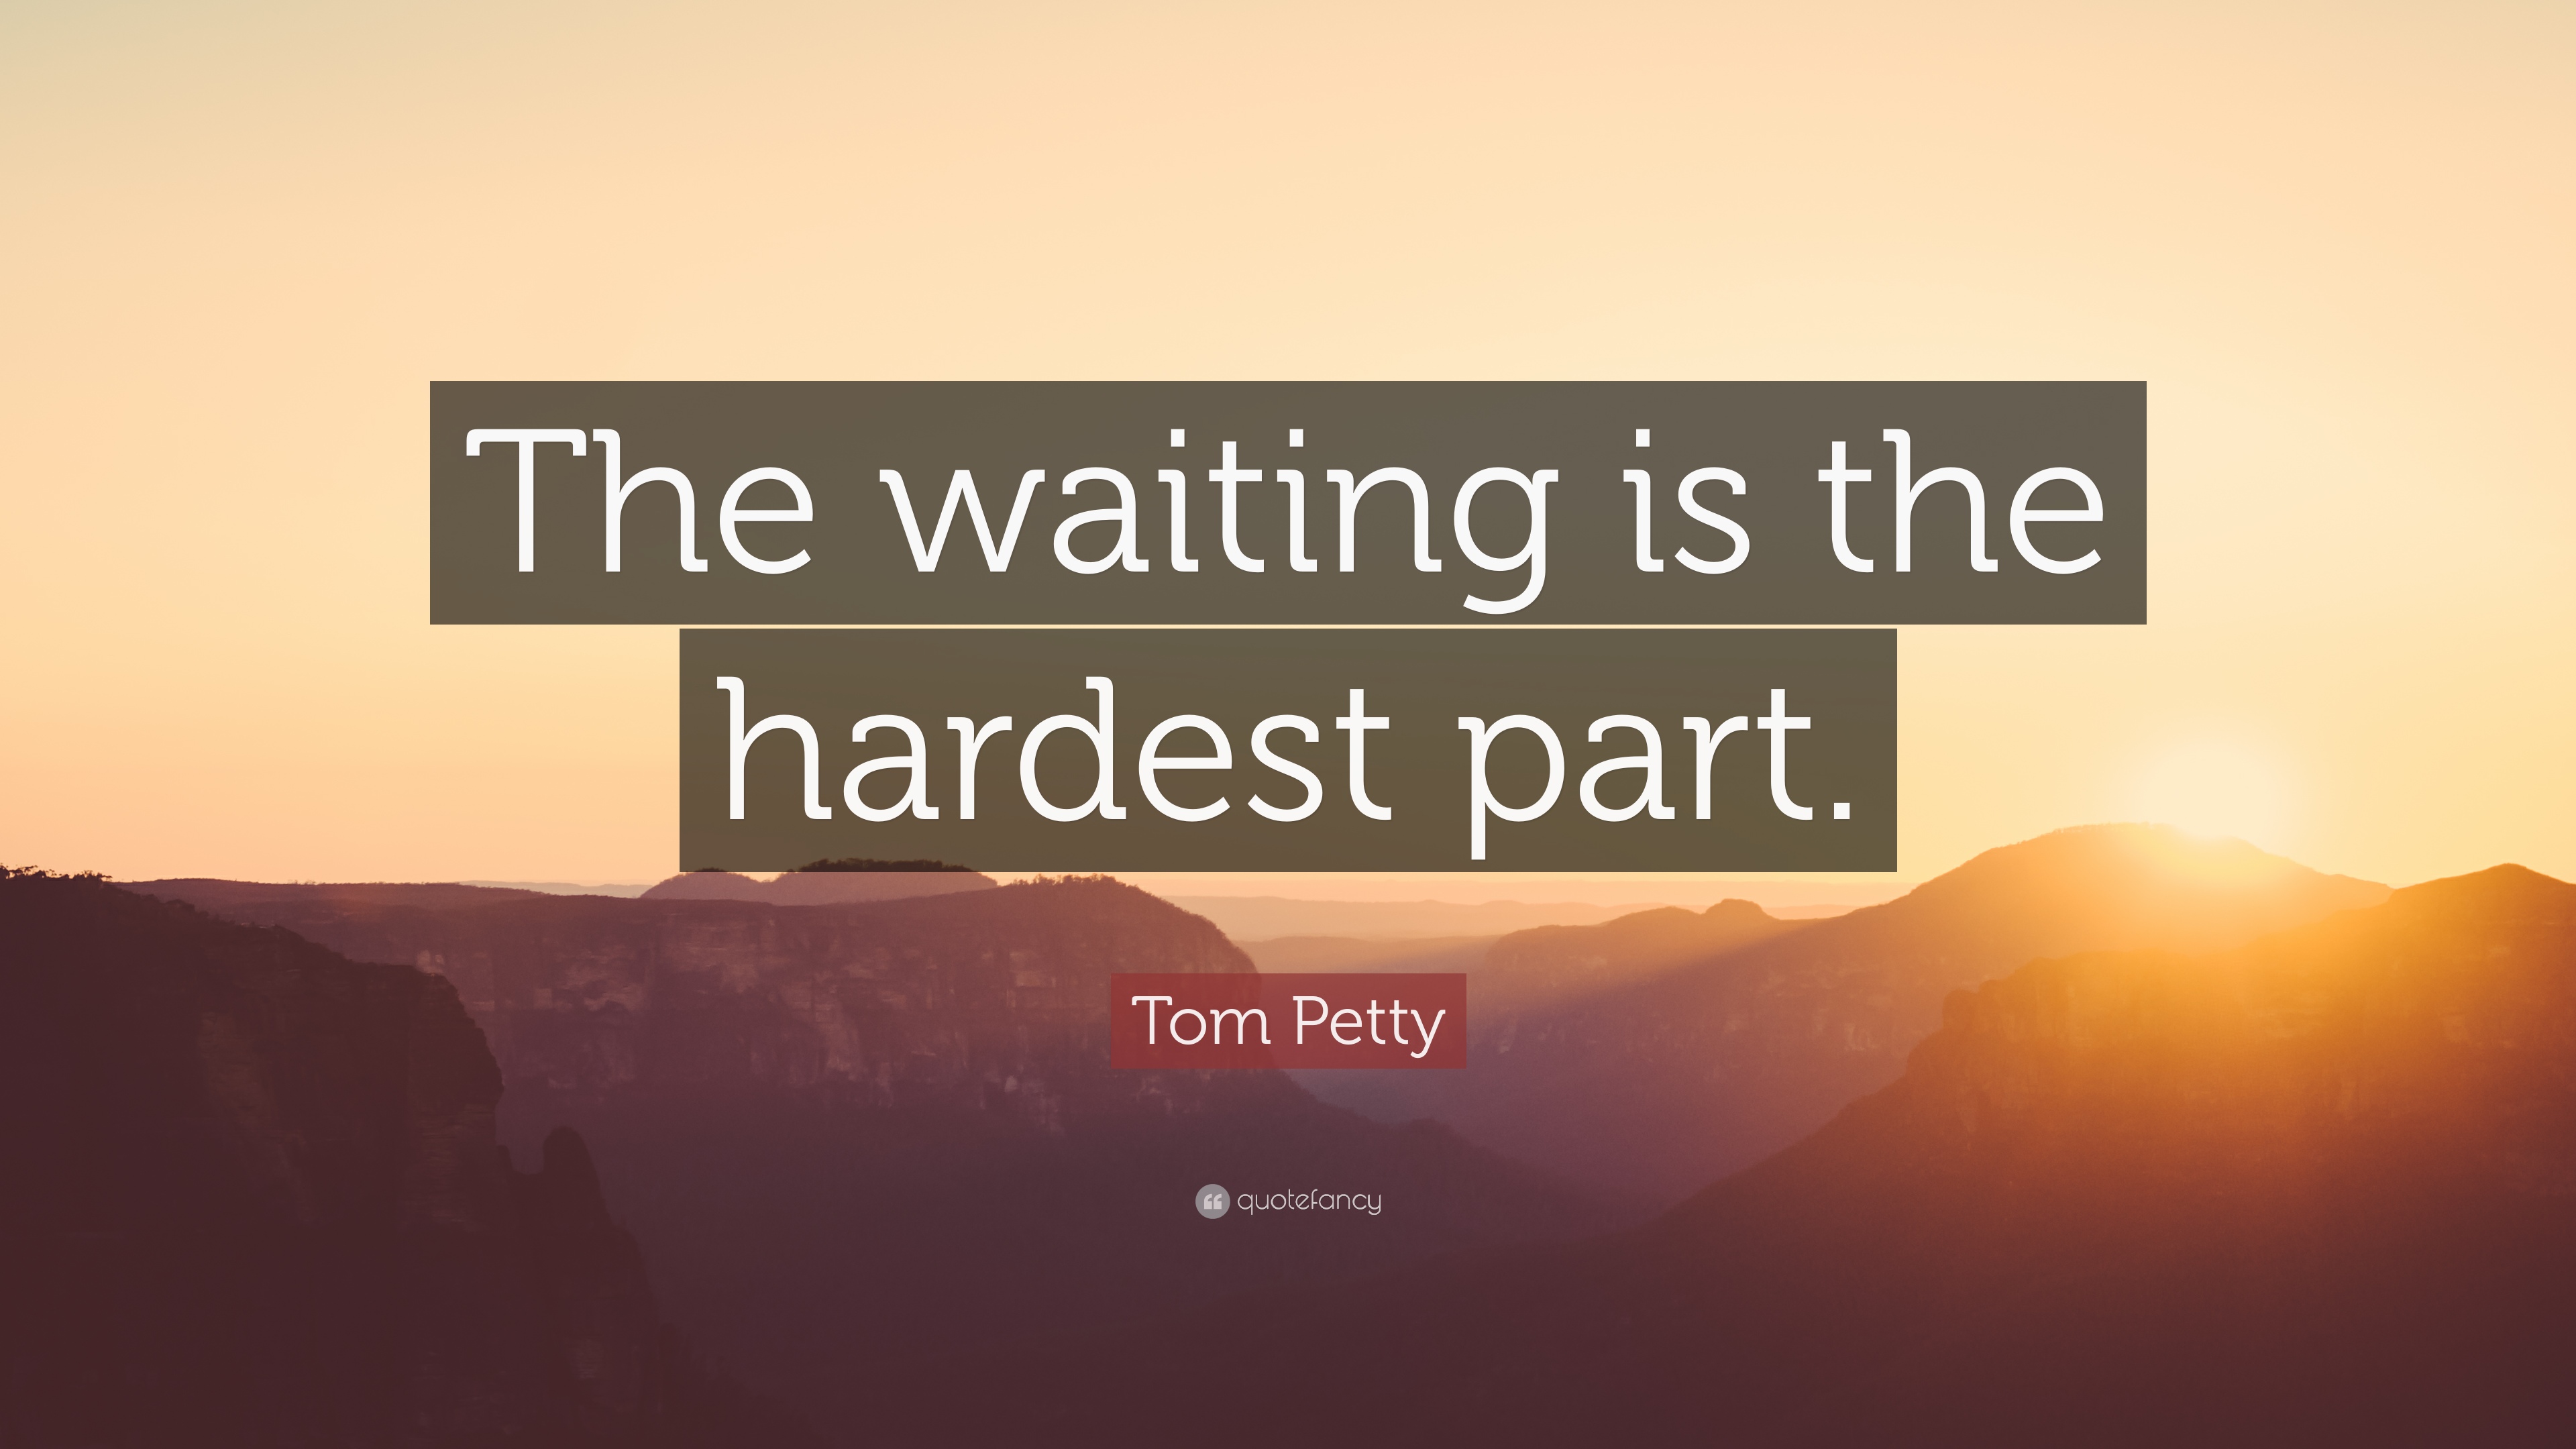 Tom Petty Quote: “The waiting is the hardest part.” (7 wallpapers ...